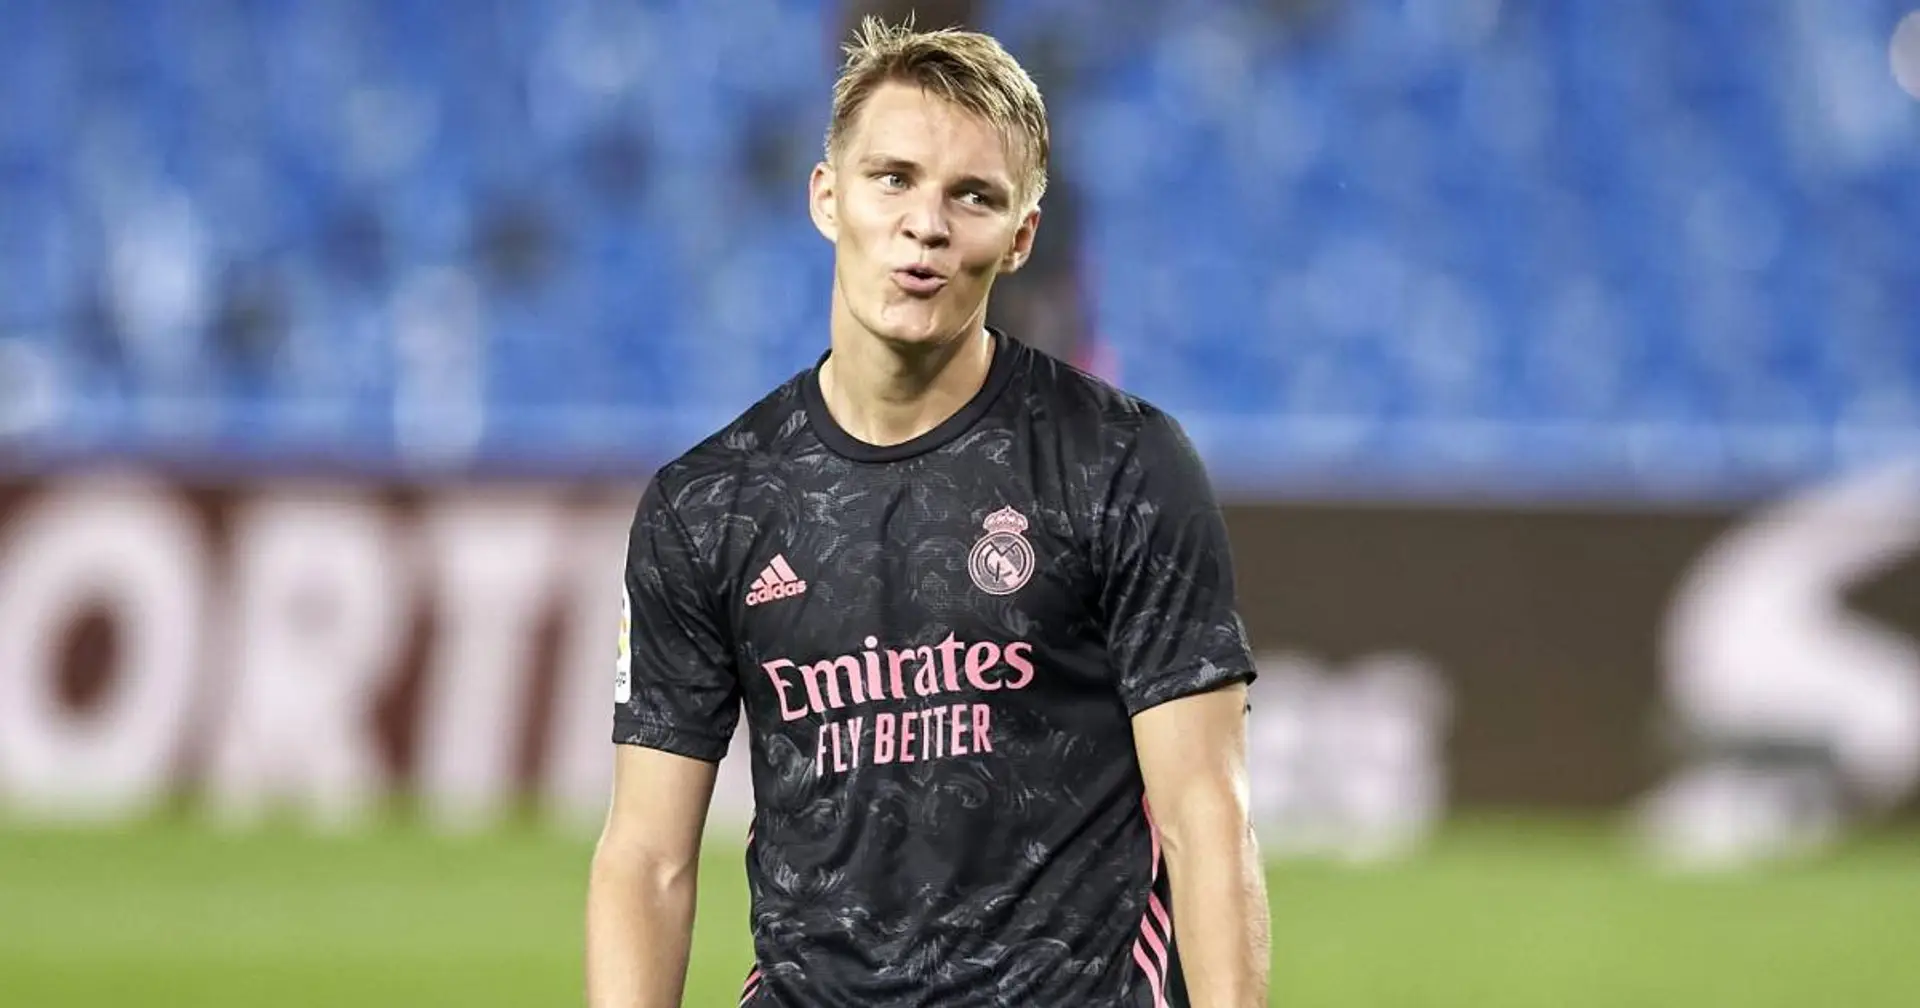 Odegaard arrives at London Colney, announcement expected tomorrow (reliability: 4 stars)